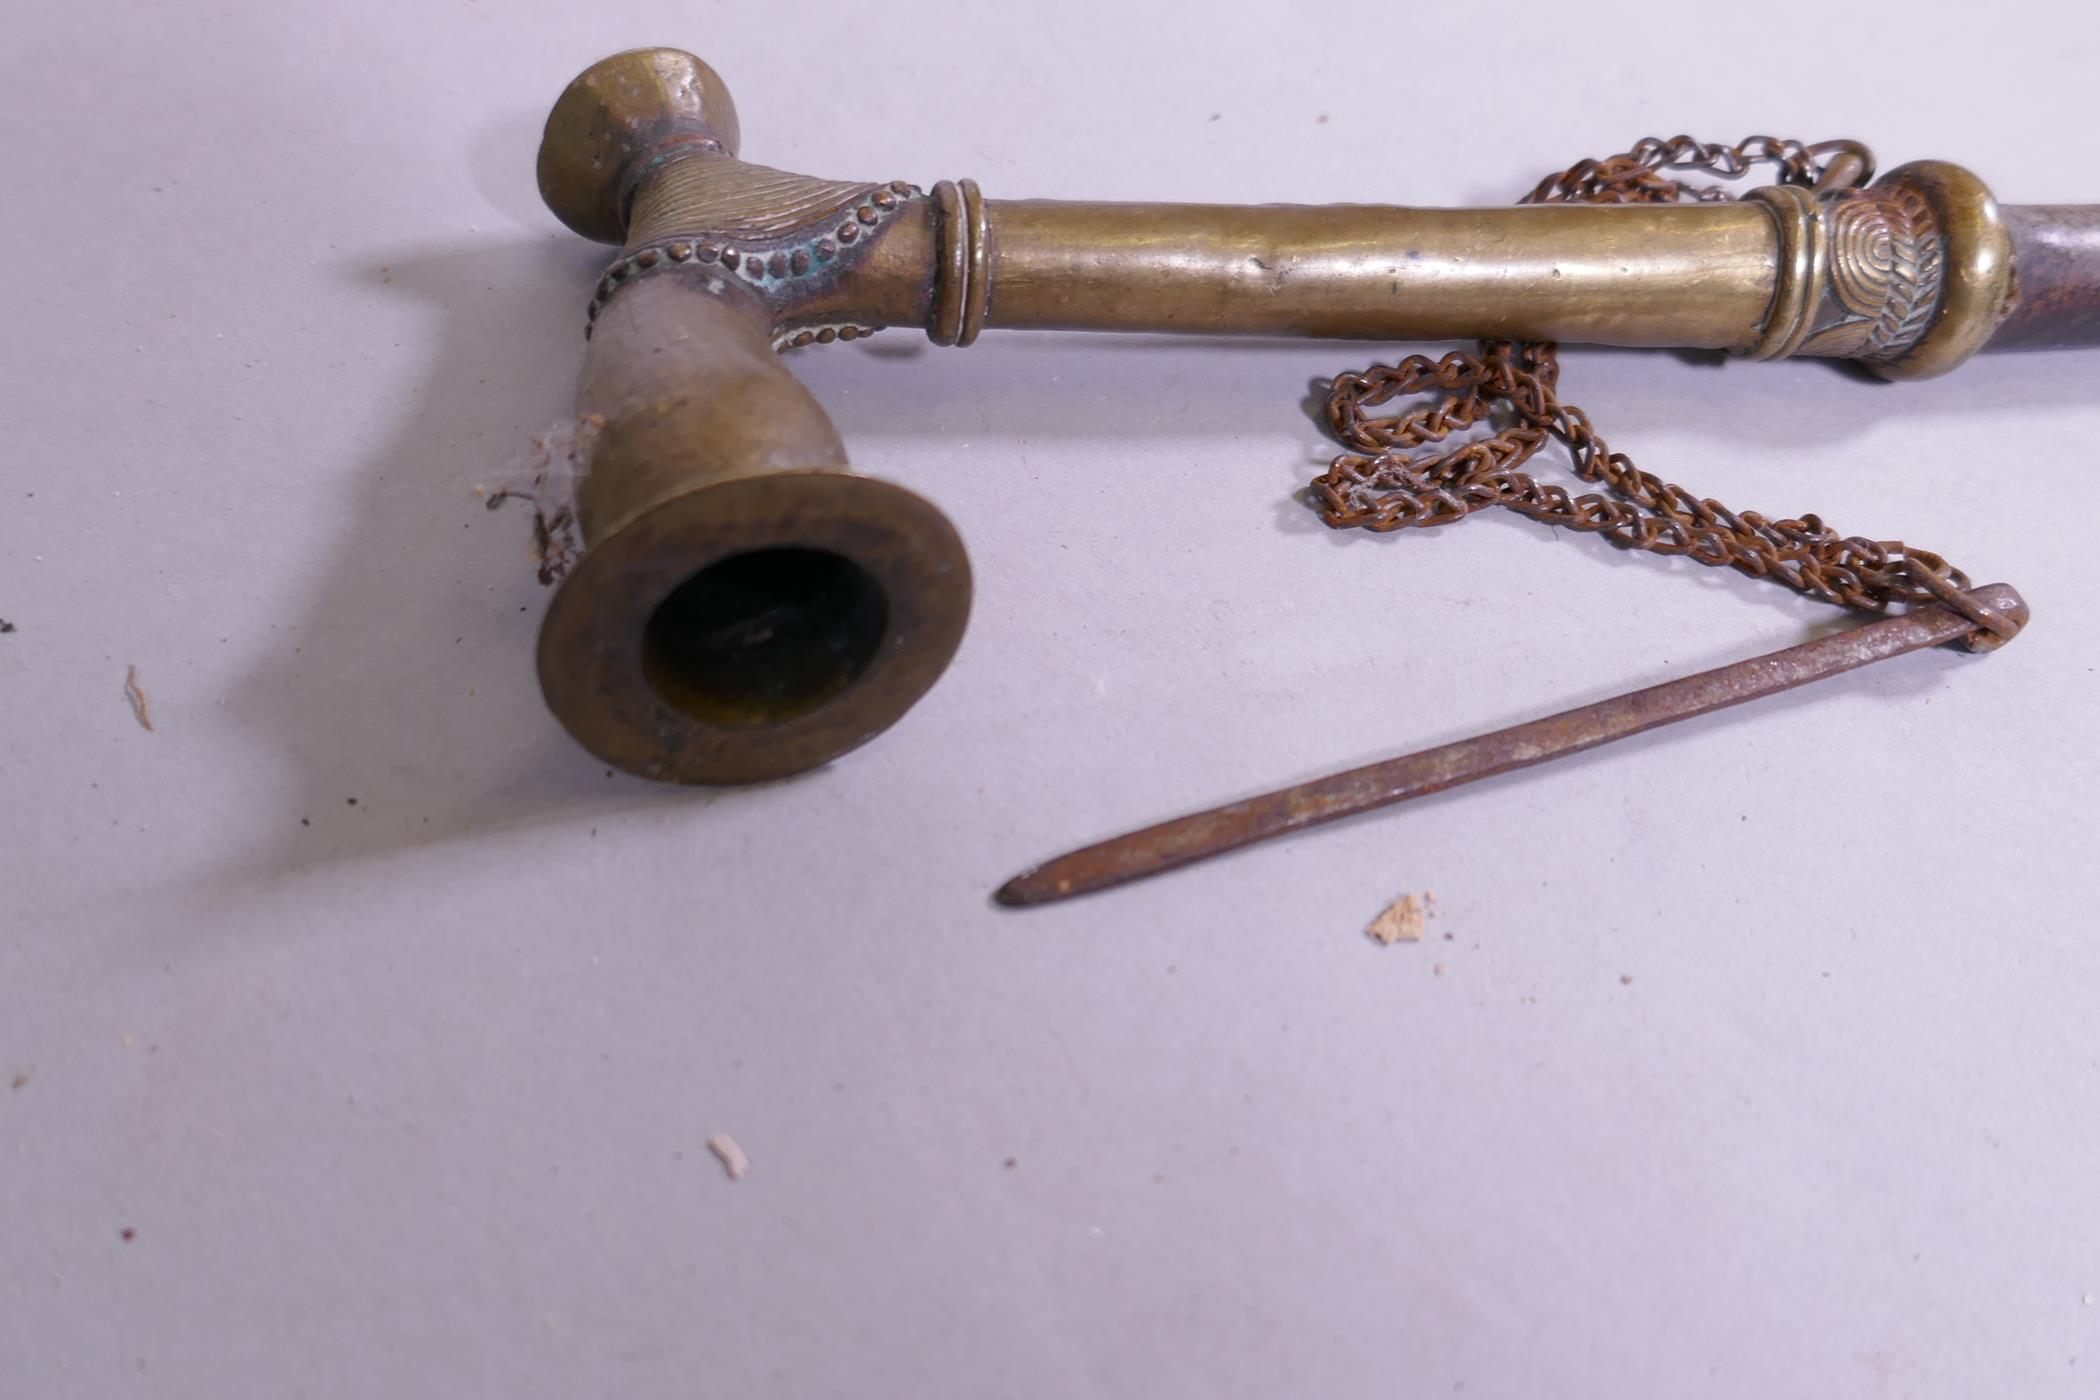 An antique Eastern bras opium pipe with stitched leather shaft, 33cm long - Image 4 of 4